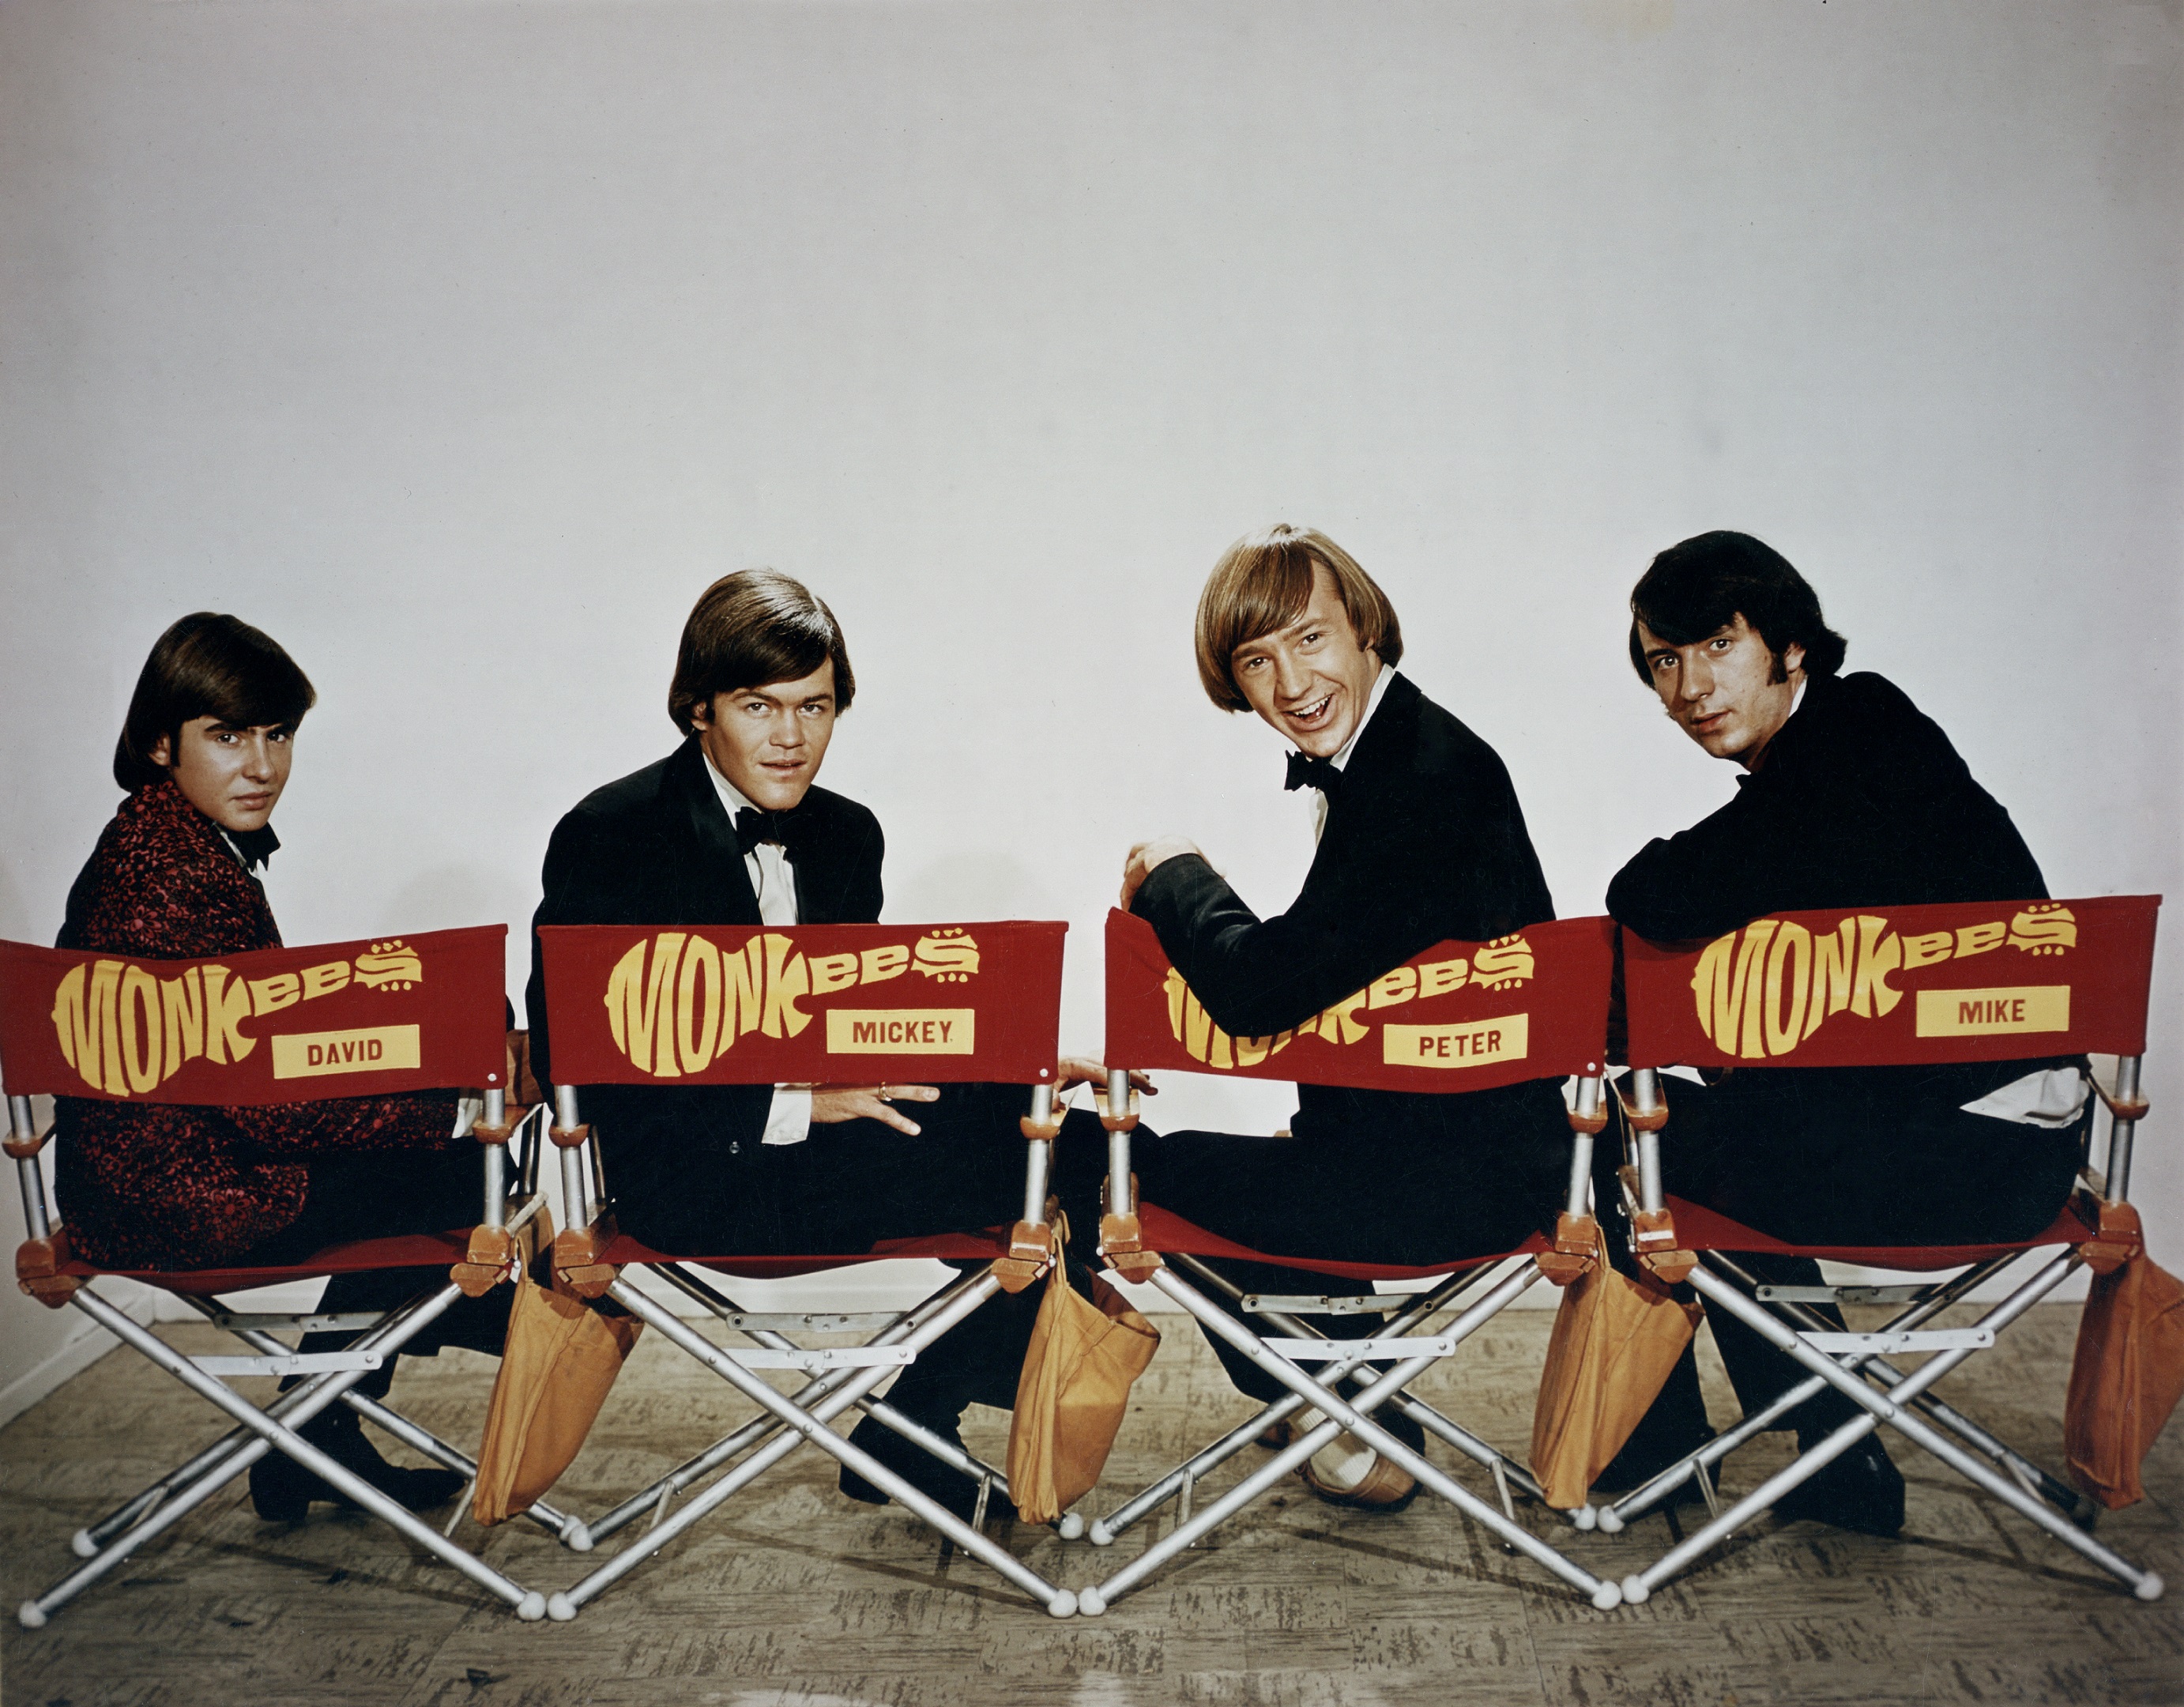 The Monkees' Davy Jones, Micky Dolenz, Peter Tork, and Mike Nesmith sitting in chairs